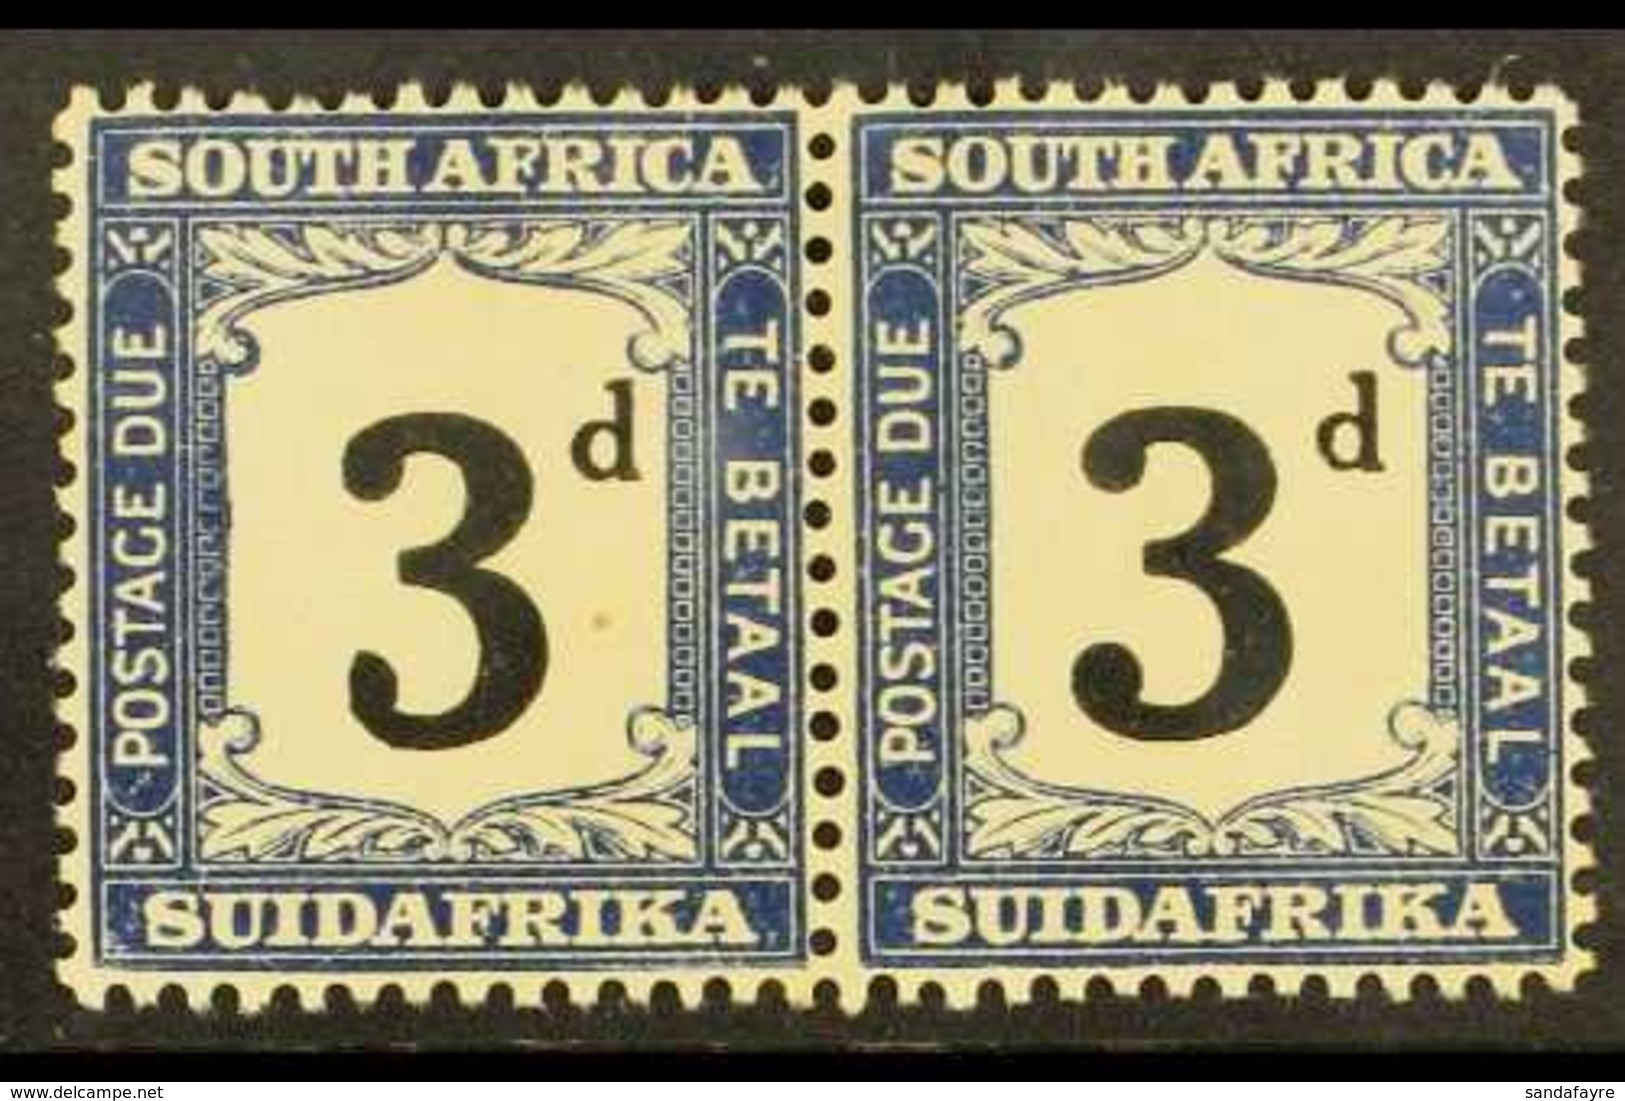 POSTAGE DUES 1927-8 3d Black & Blue, Horizontal Pair With WARPED "3" VARIETY, SG D20, Fine Mint. For More Images, Please - Unclassified